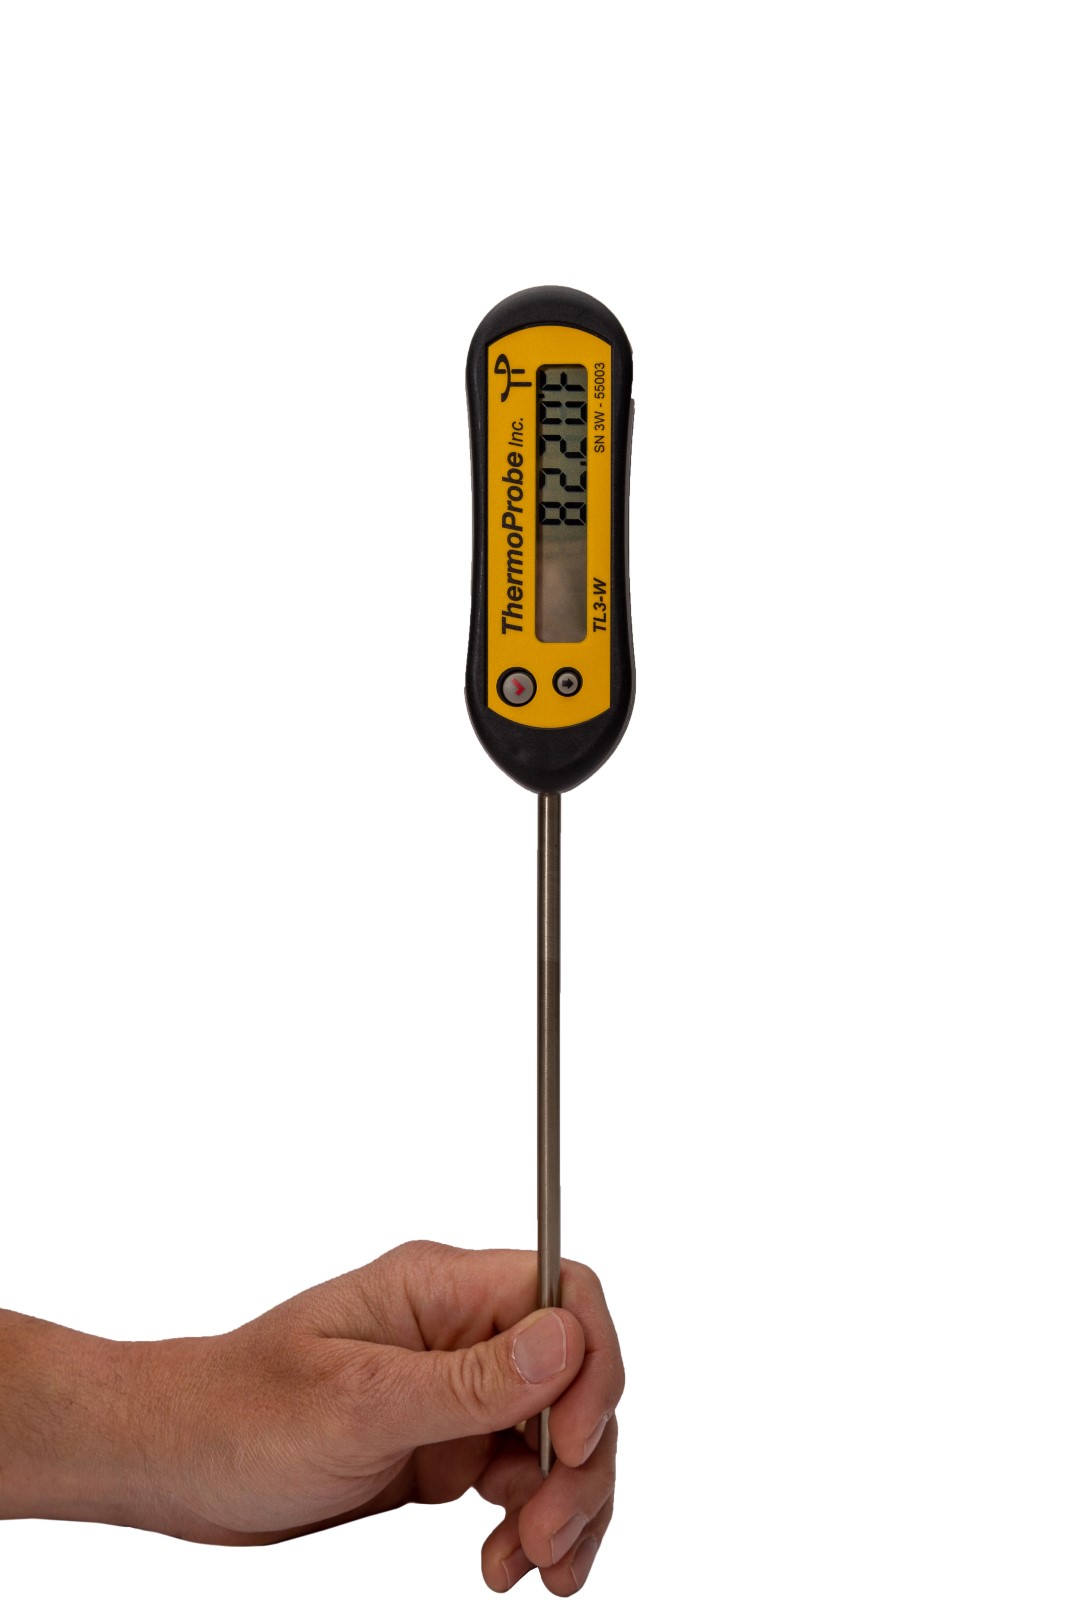 ThermoProbe Digital Thermometers - Petroleum Gauging Thermometers